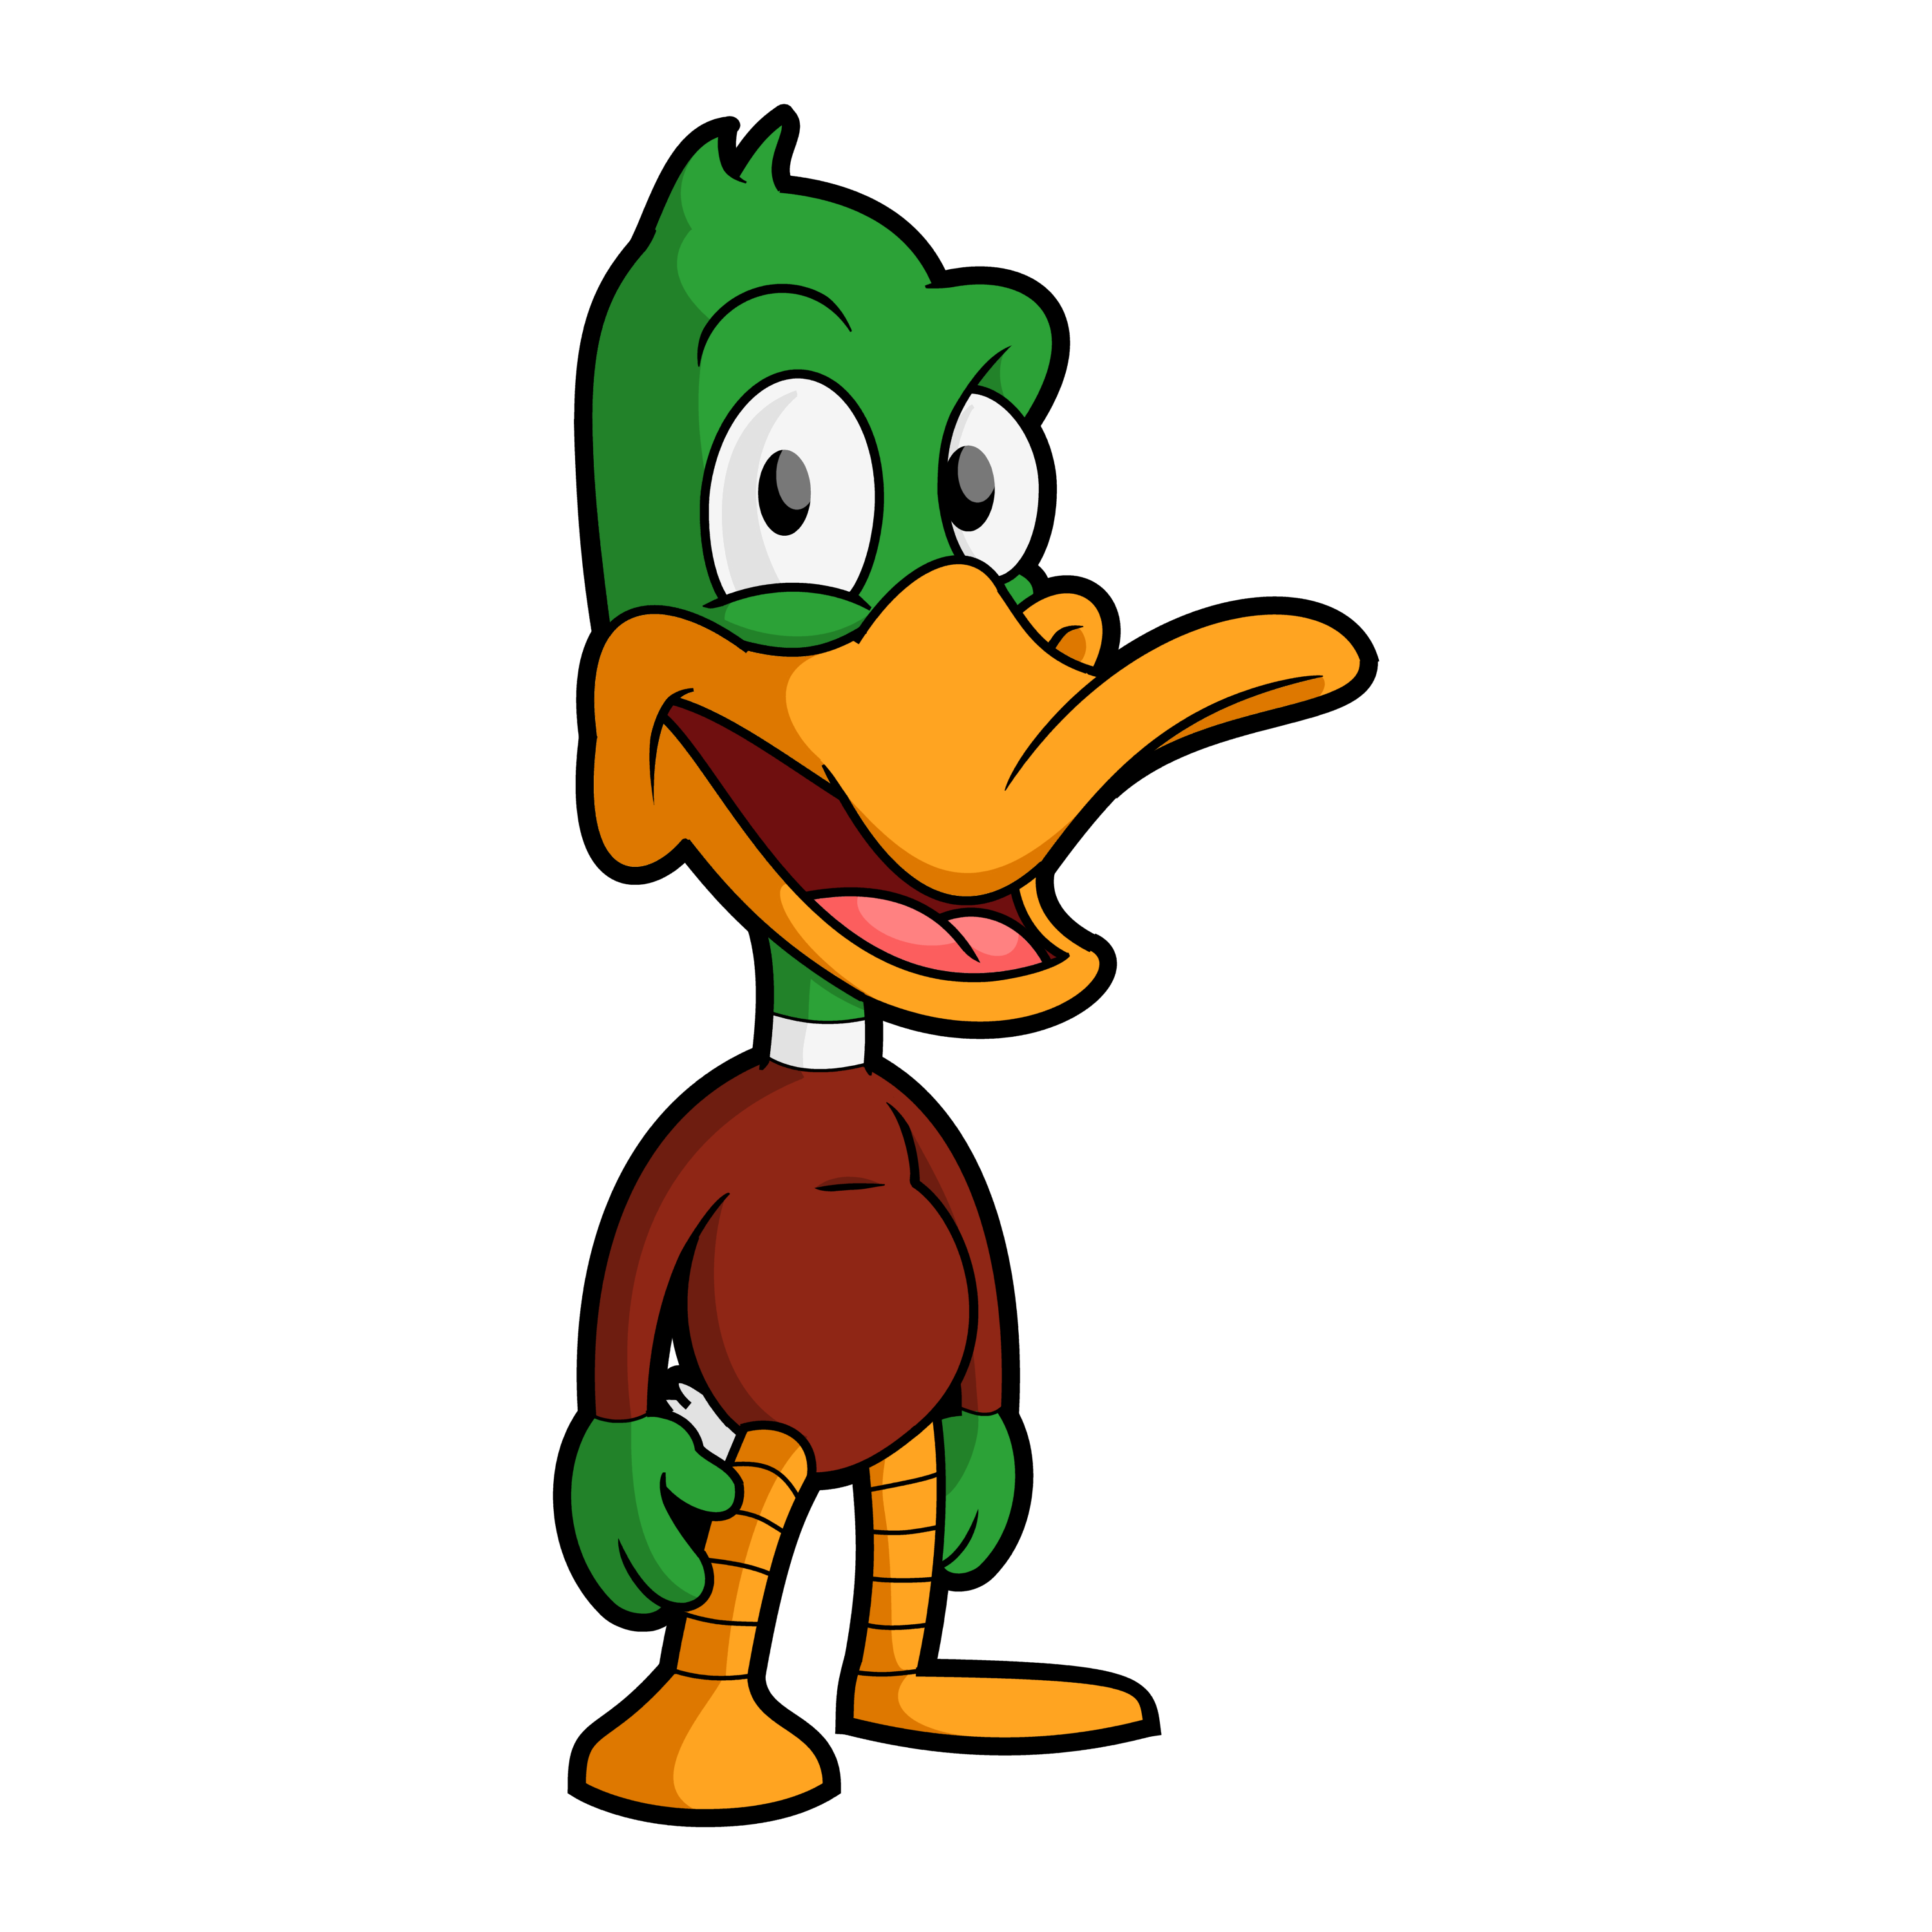 Cartoon Ducks Images | Free download on ClipArtMag